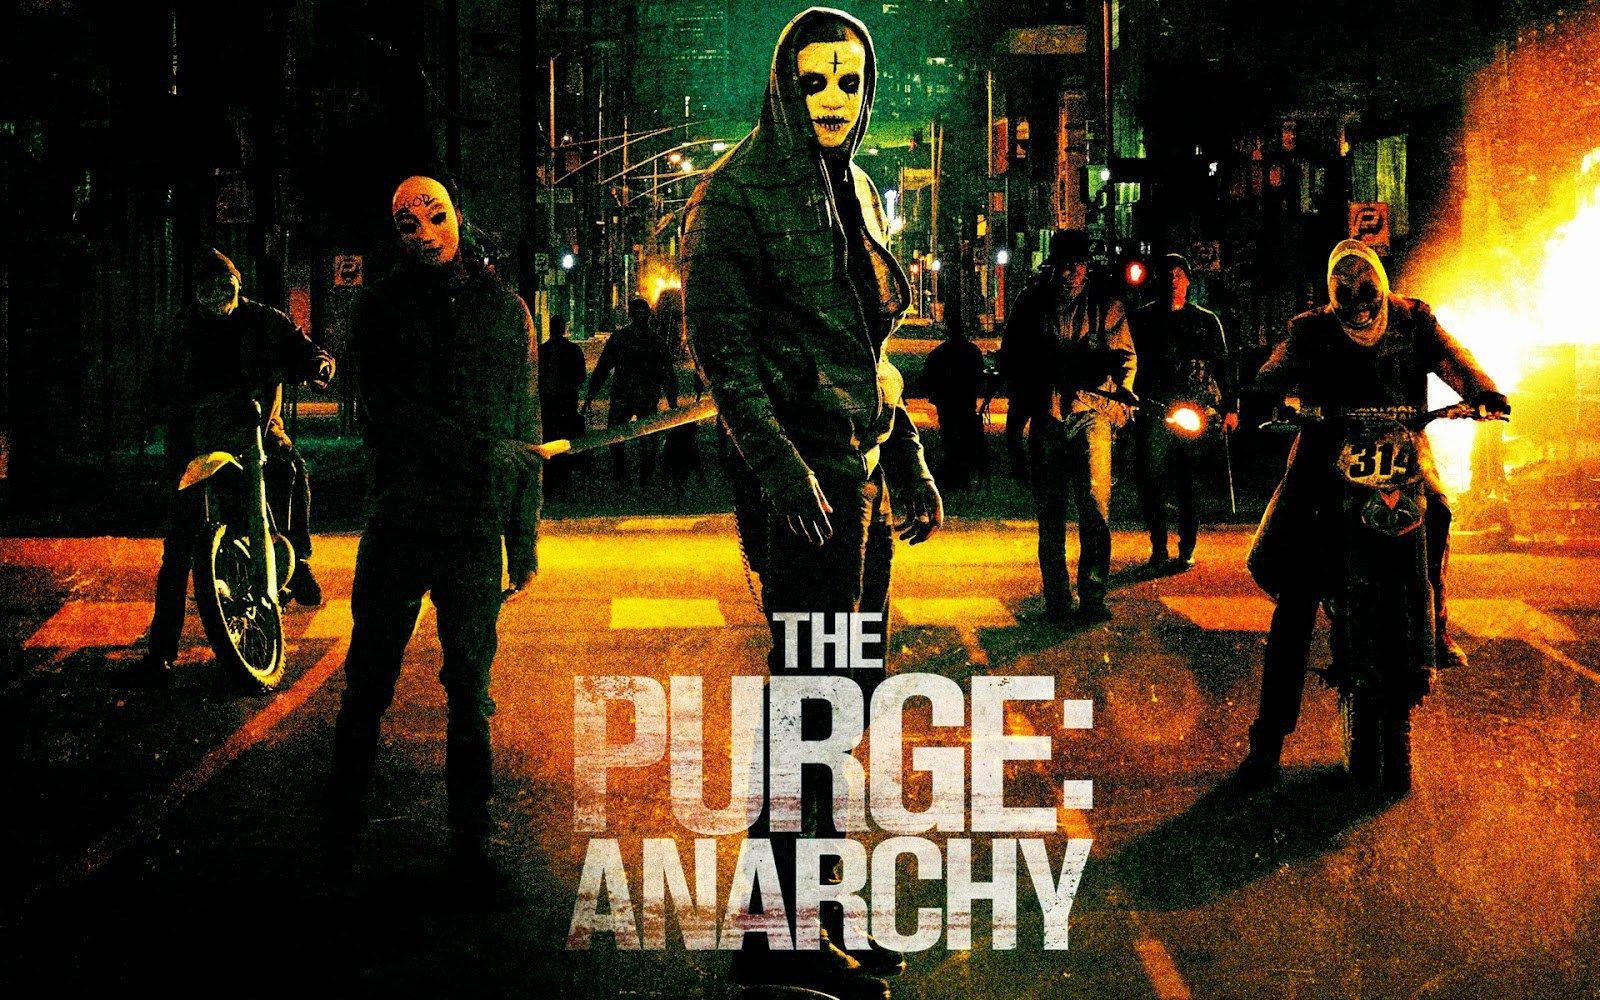 The Purge: Anarchy (2014) 179 of 366